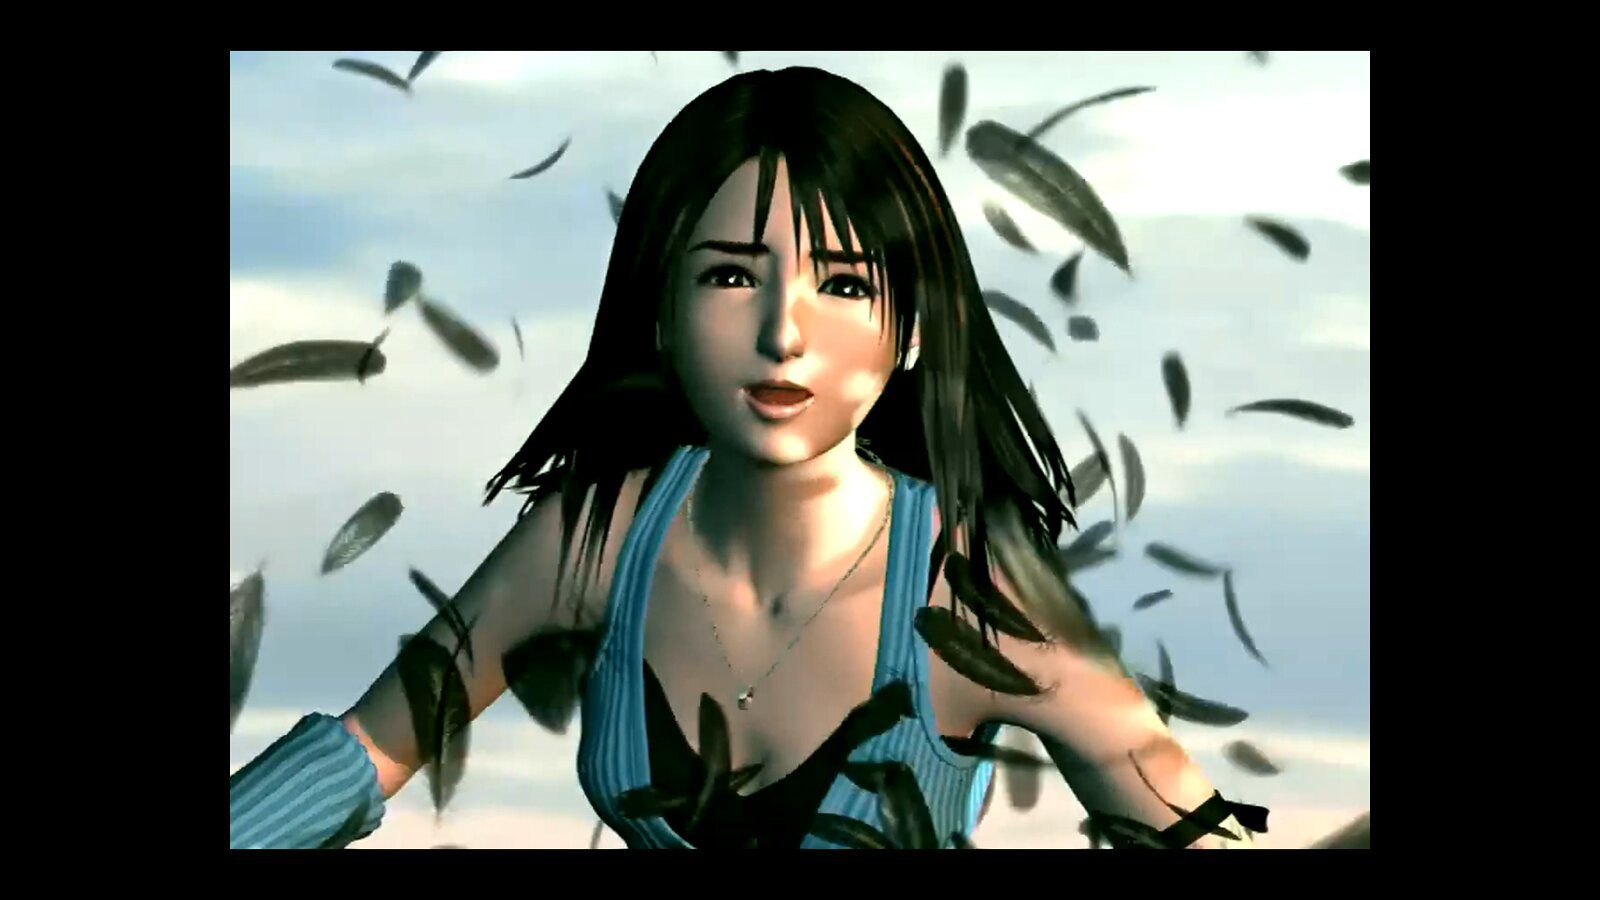 Final Fantasy VIII Remastered on PS4